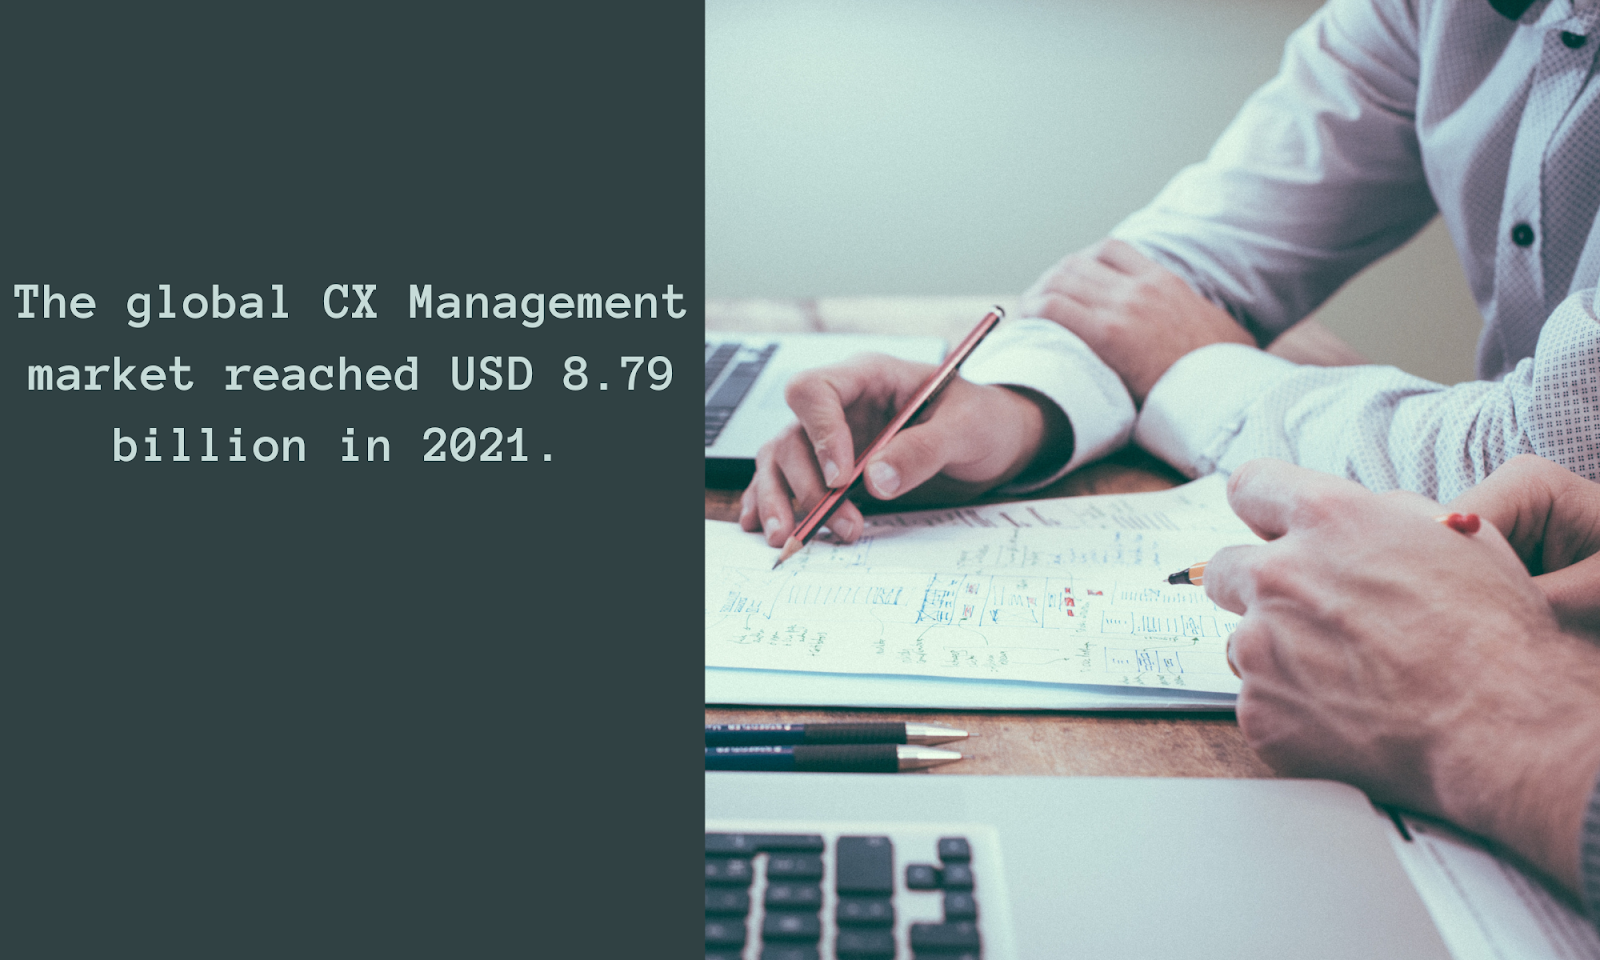 The global CX Management market reached USD 8.79 billion in 2021